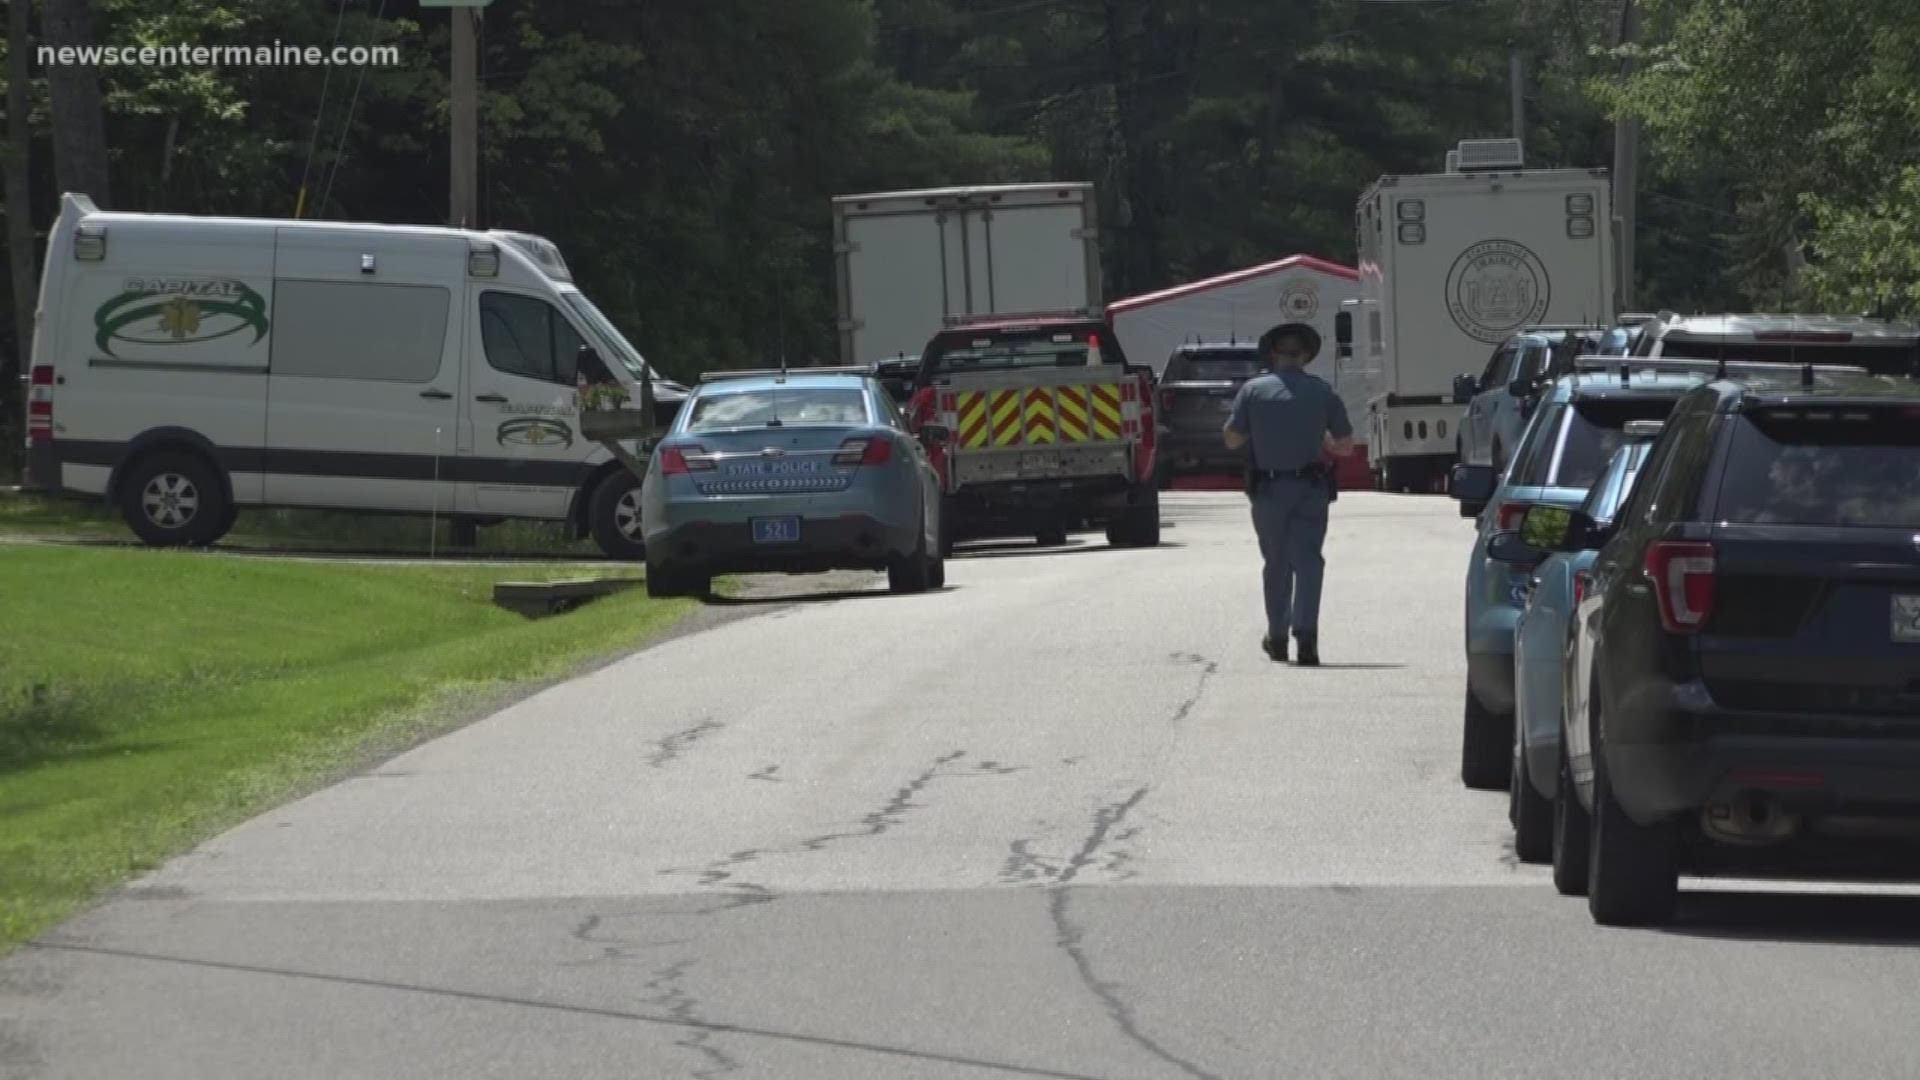 Three people are in jail after a nearly 12-hour standoff at a mobile home in Orrington.